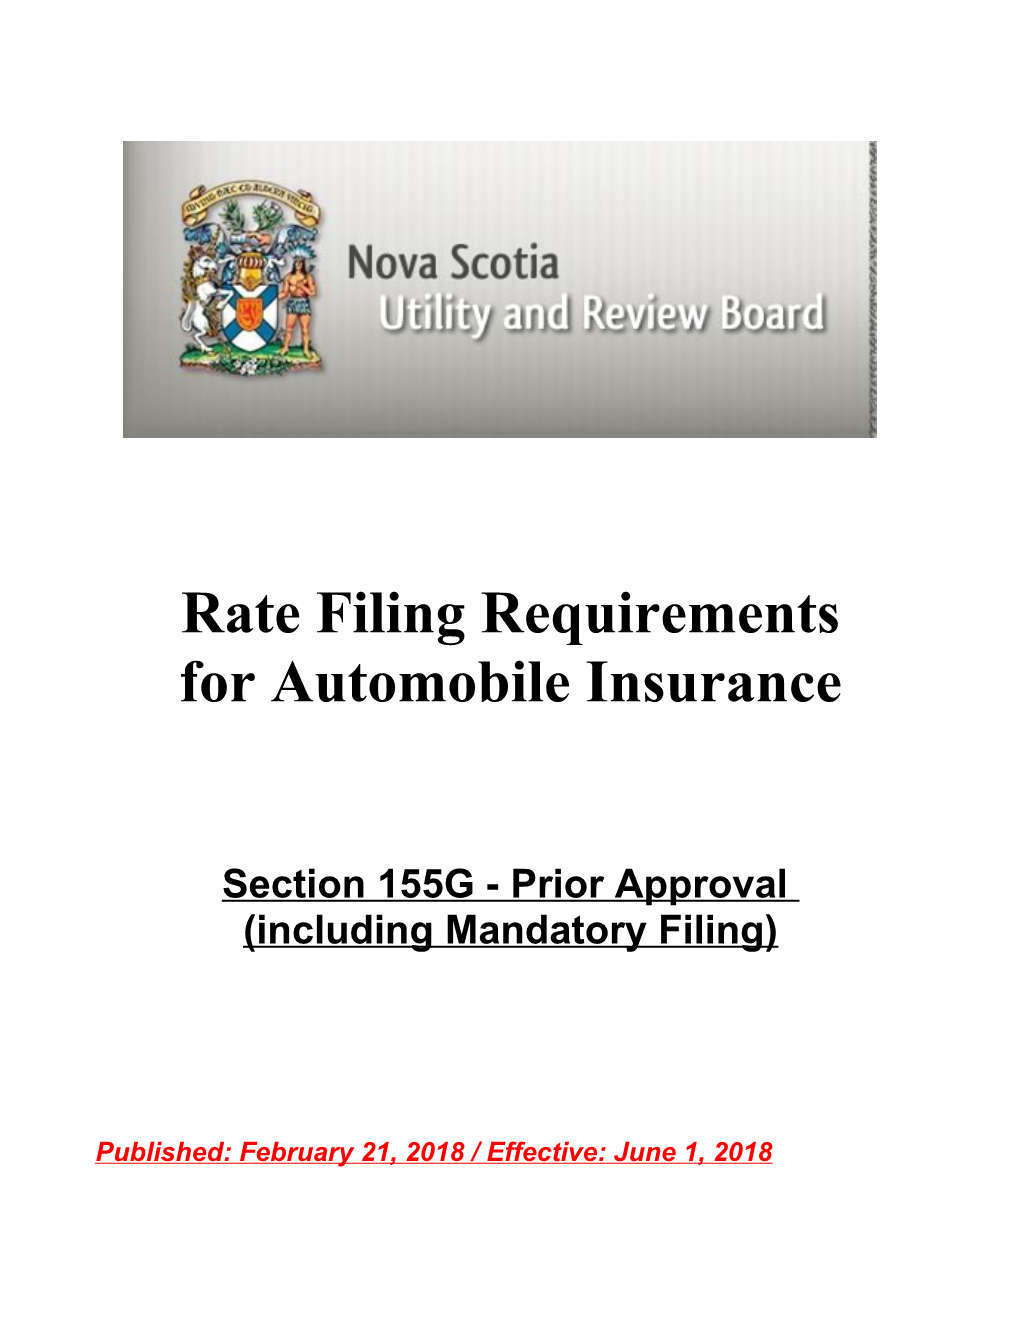 Approved by the Nova Scotia Insurance Review Board